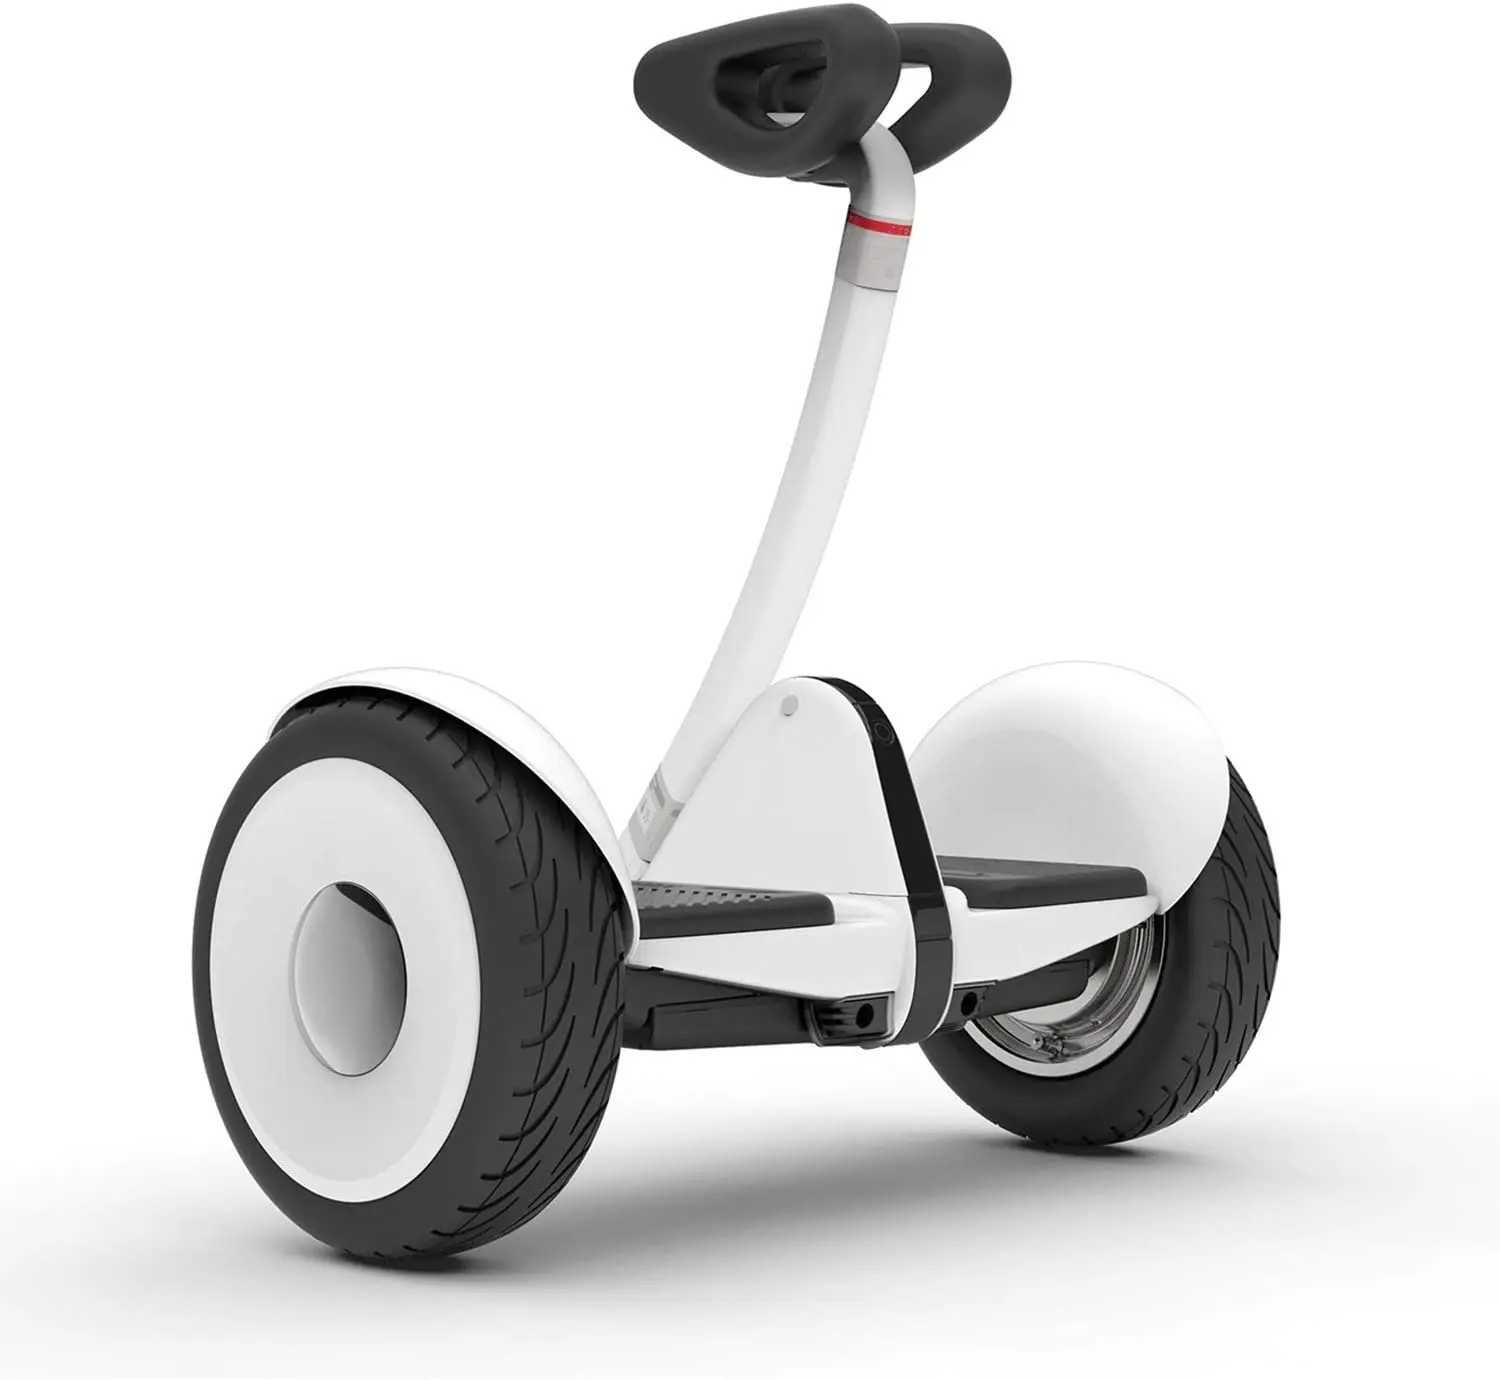 

Portable Smart Self-Balancing Electric Scooter with LED Light OEM 10 Inch Balance Wheels Electric Handlebar Hoverboard, White, black or customized